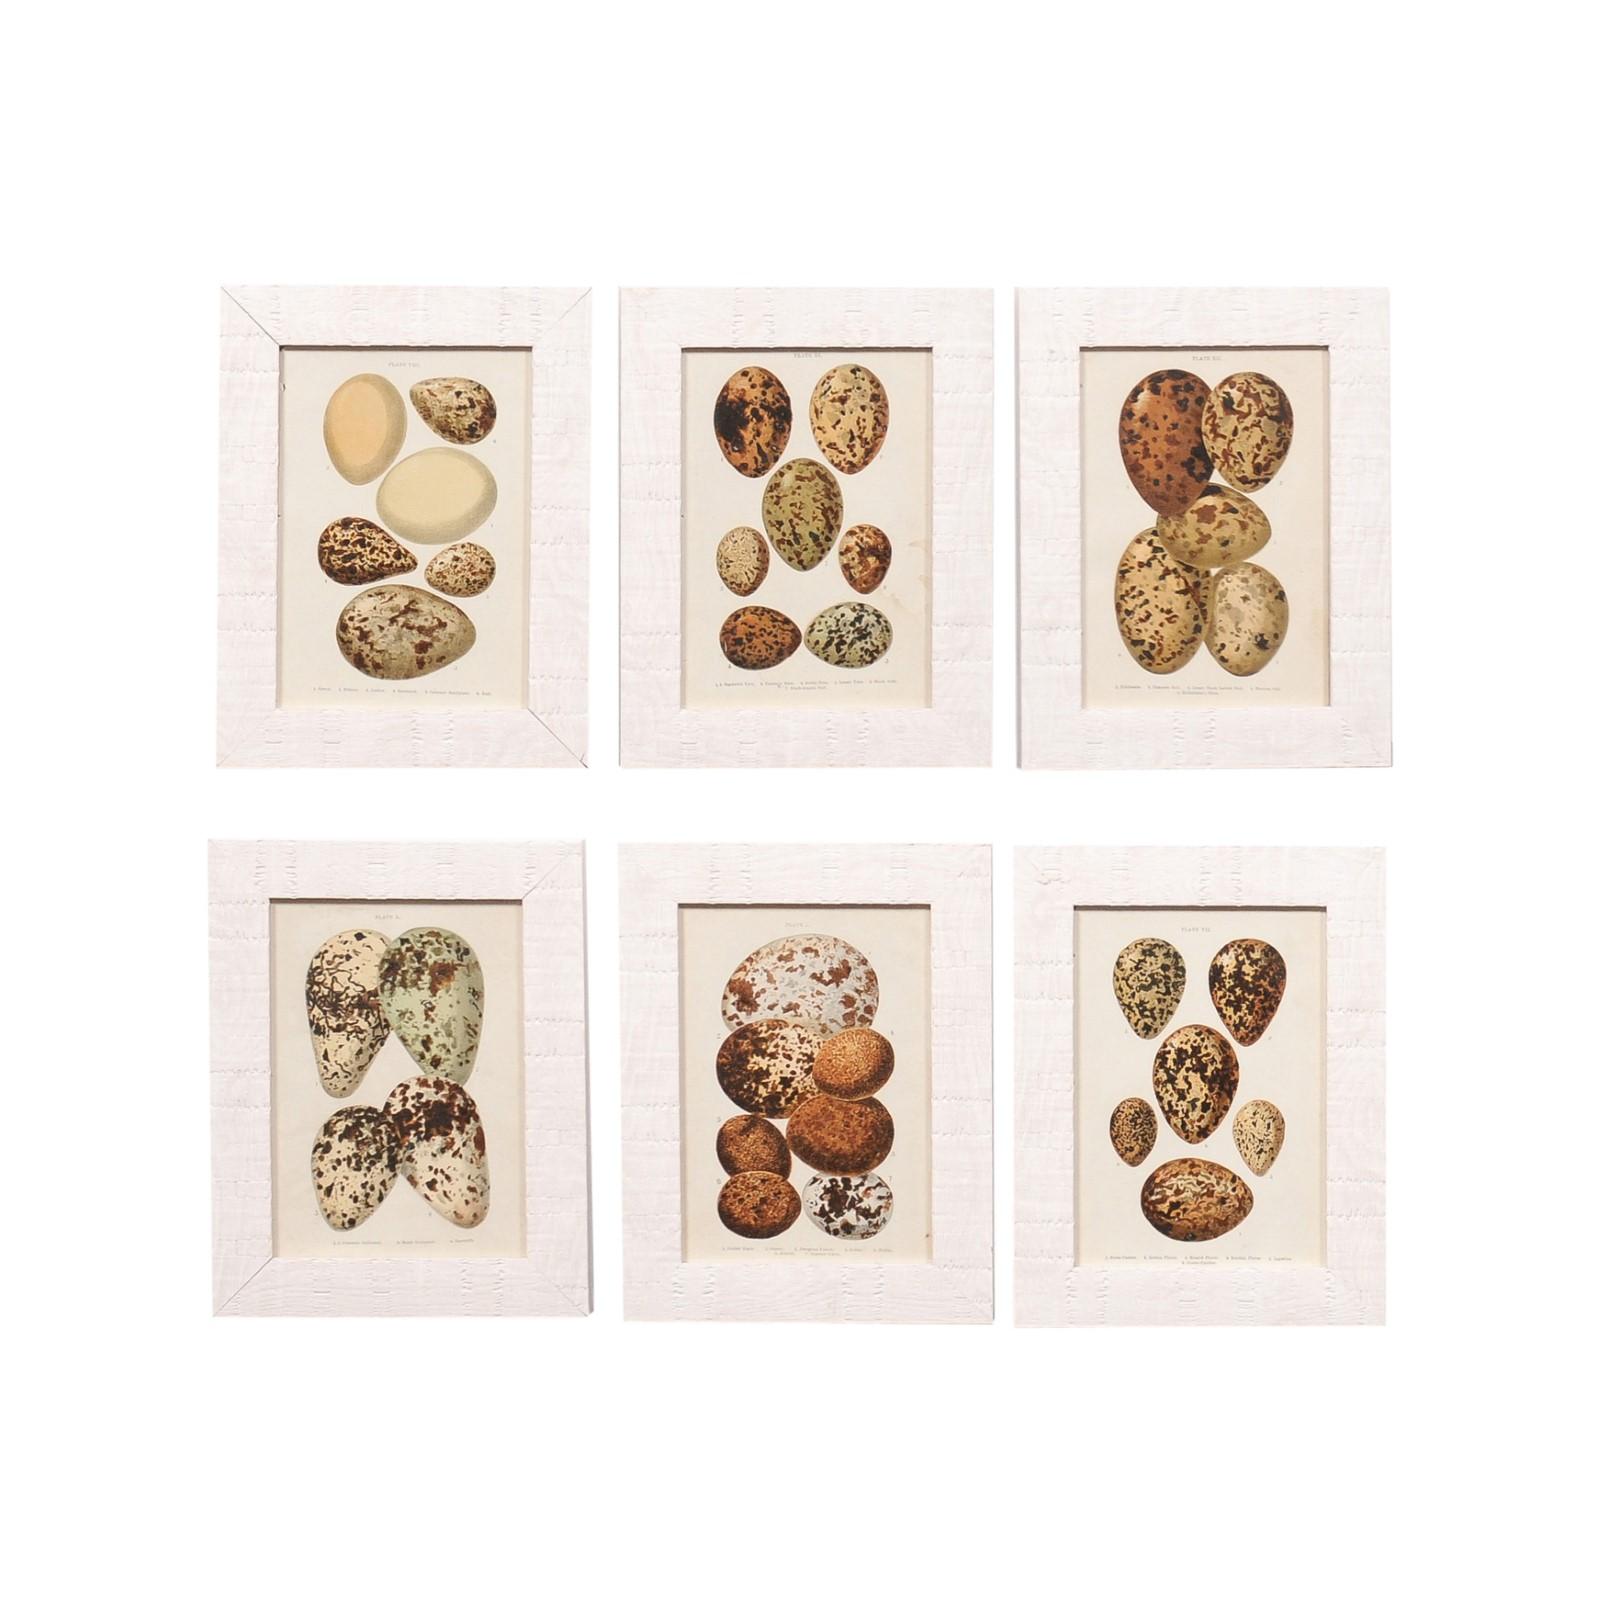 English egg prints from the 20th century in custom wooden frames and under glass. Adorn your living space with a touch of natural history with these exquisite English egg prints from the 20th century, each artfully presented in a custom wooden frame